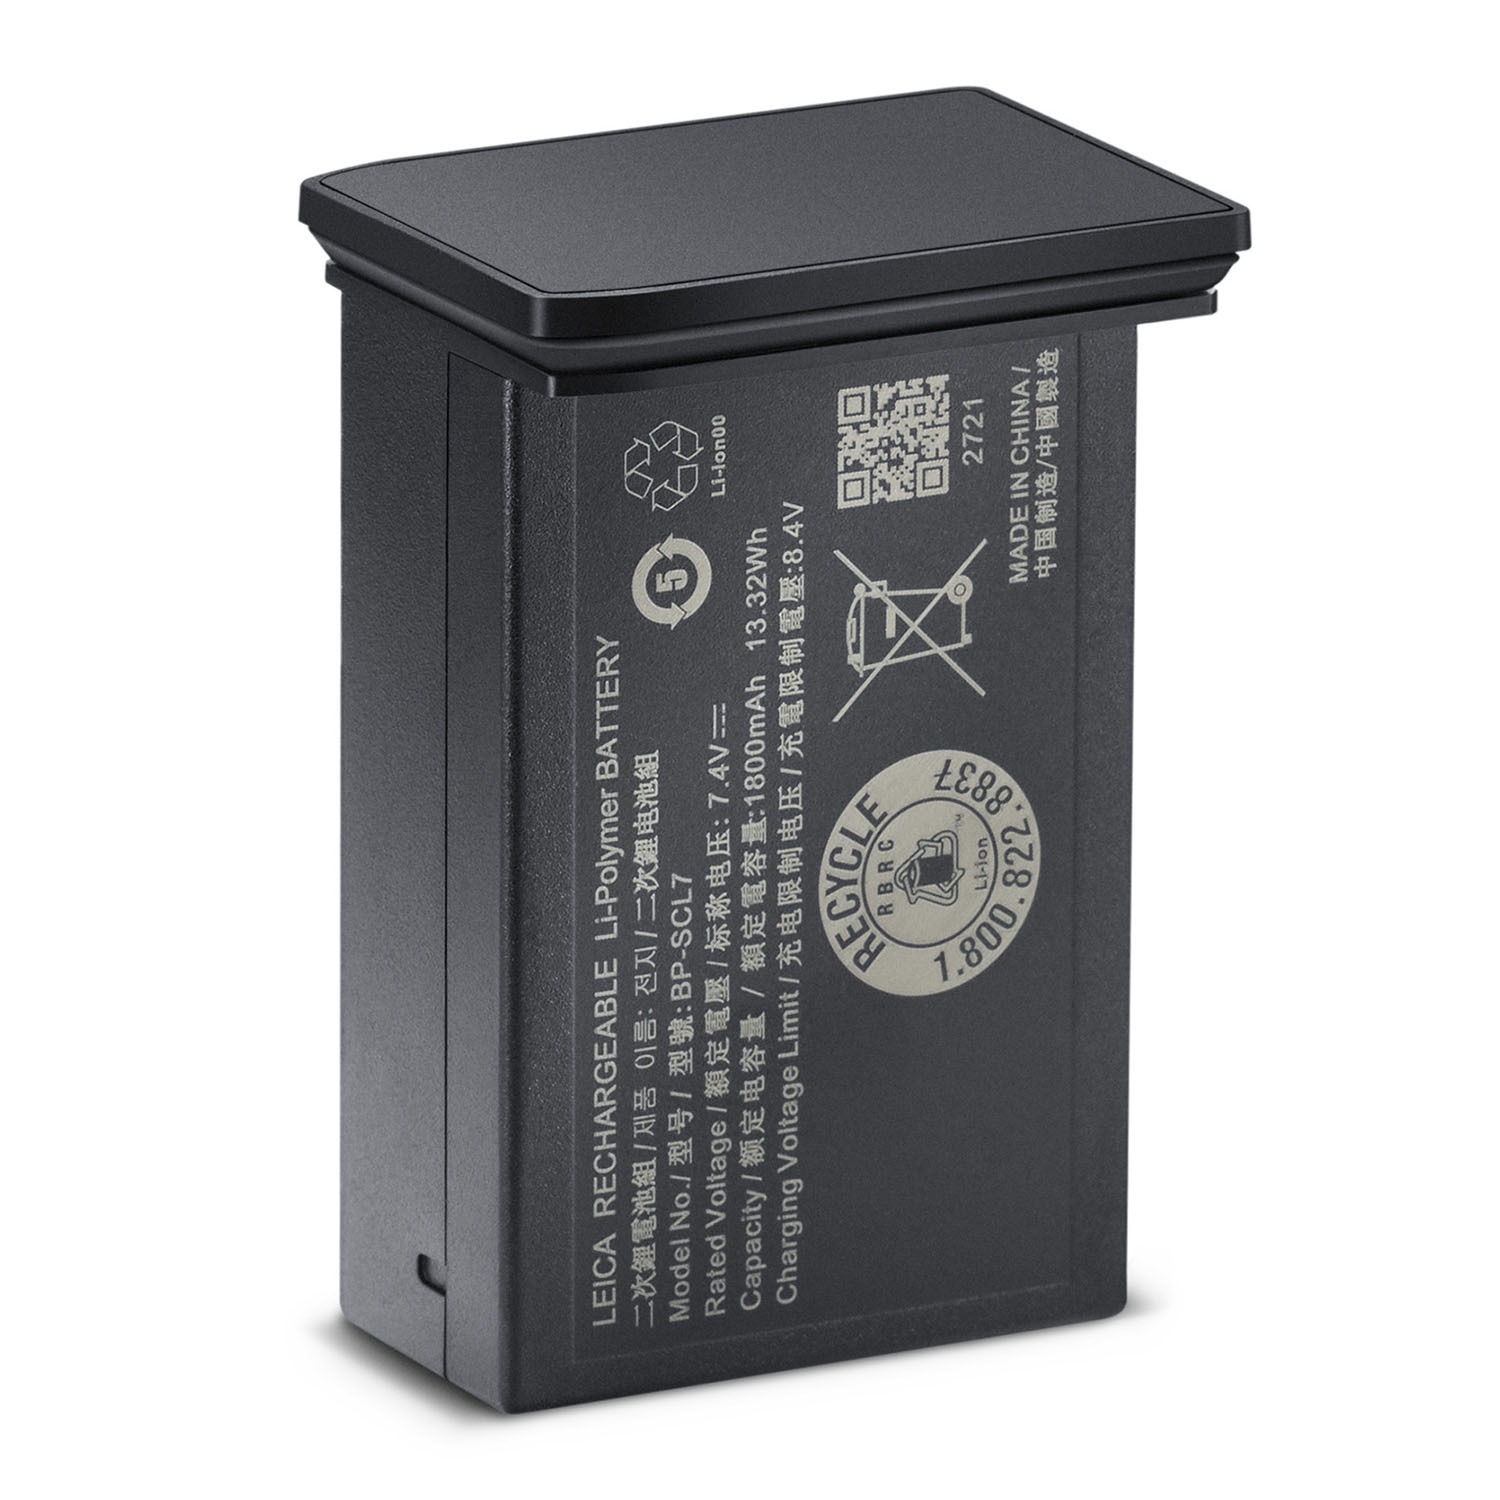 Leica BP-SCL7 Black Battery for M11